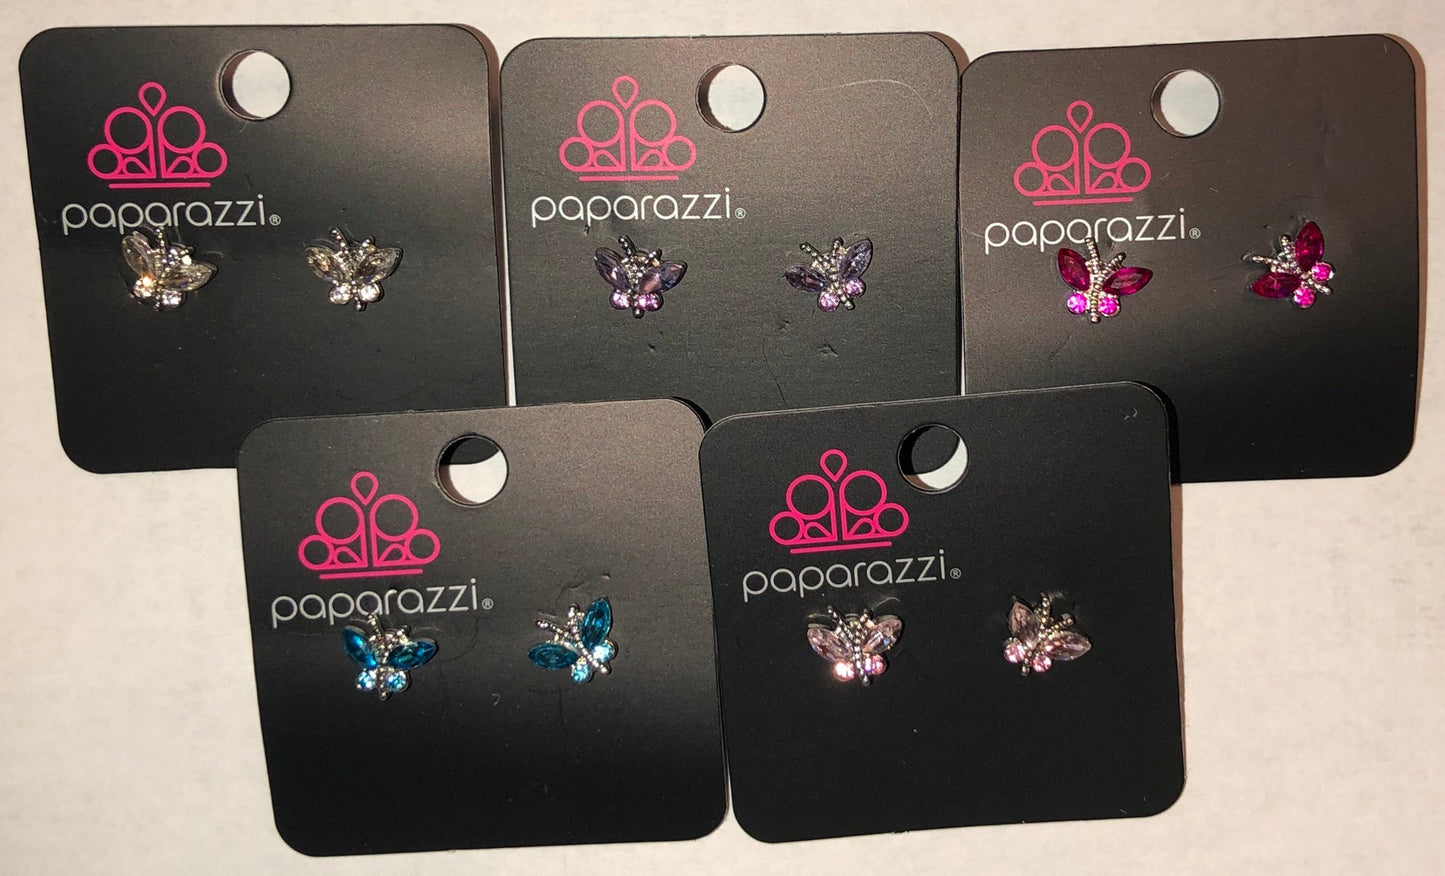 Paparazzi Accessories - RHINESTONE BUTTERFLY #SS14 - Starlet Shimmer Earrings